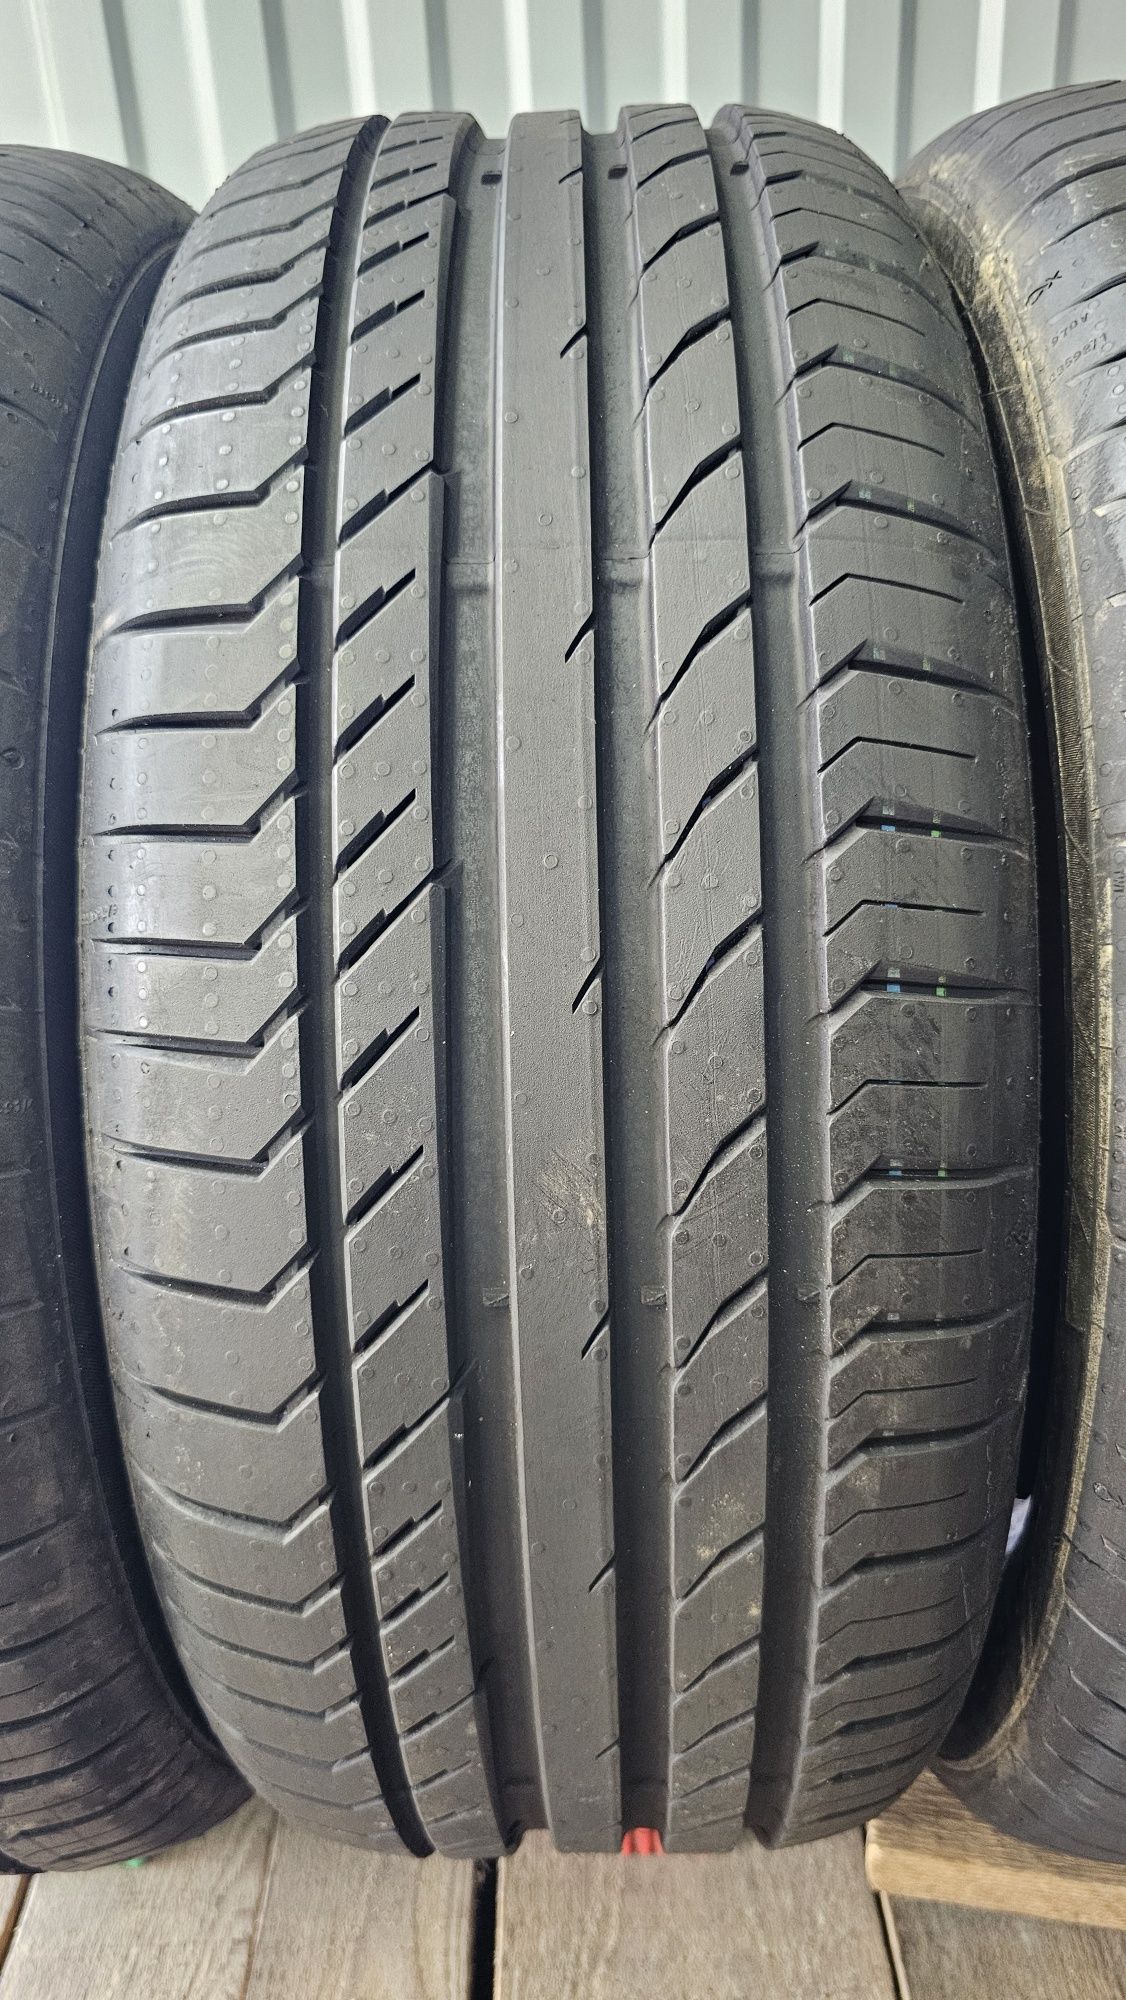 Continental ContiSportContact 5 MO 225/50r17 94W